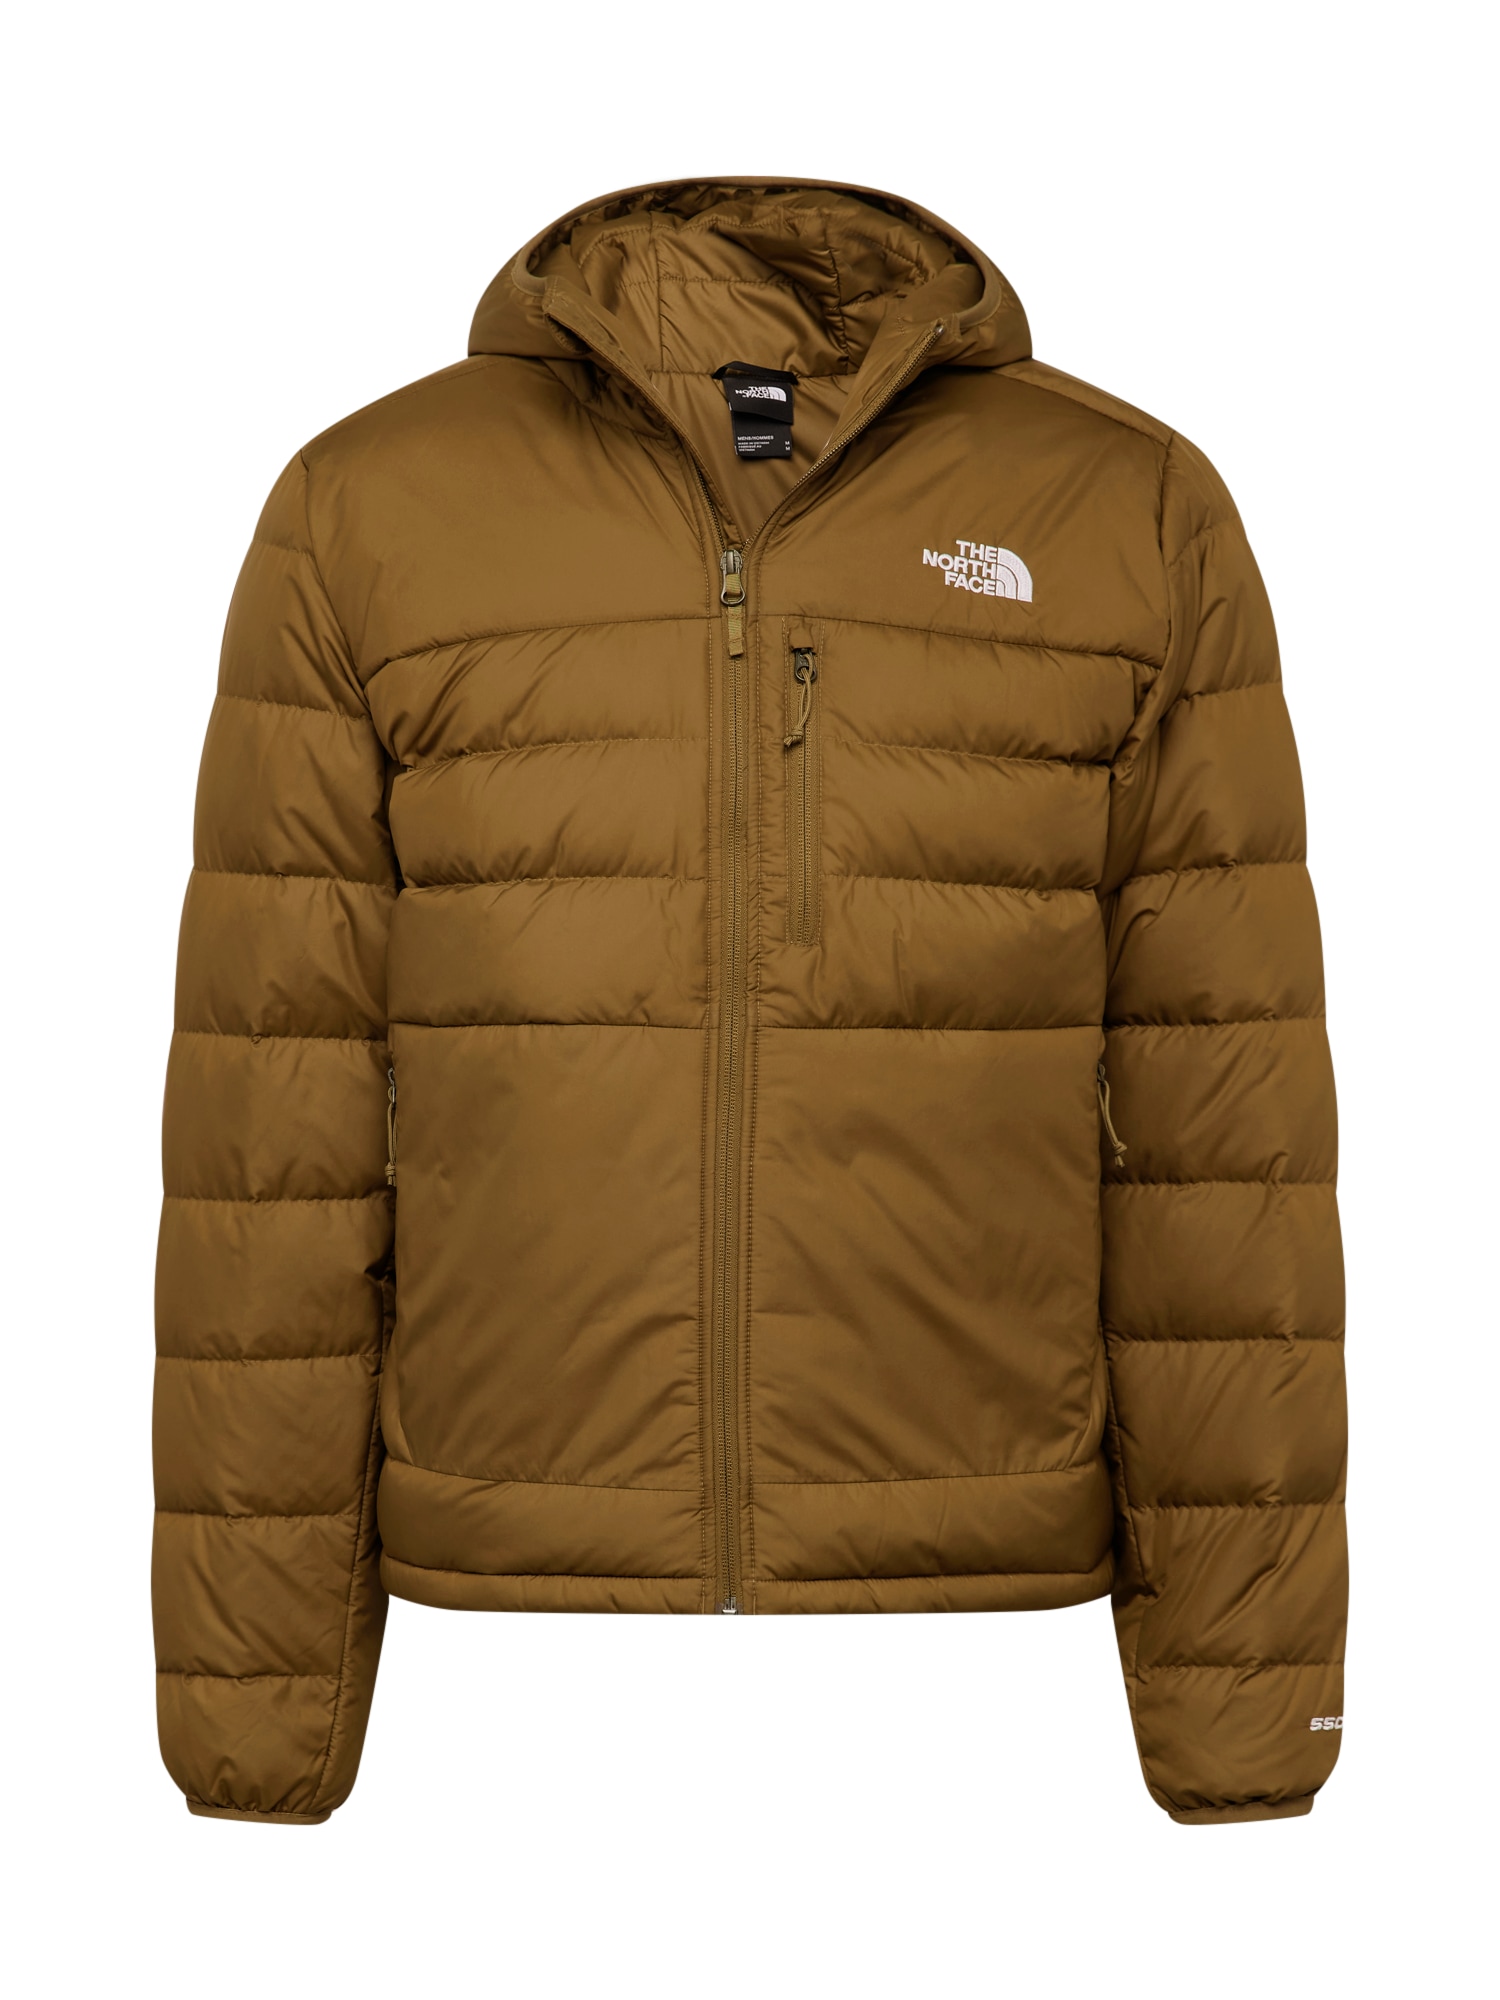 THE NORTH FACE Outdoorjacke ''''ACONCAGUA 2'''' oliv / wei